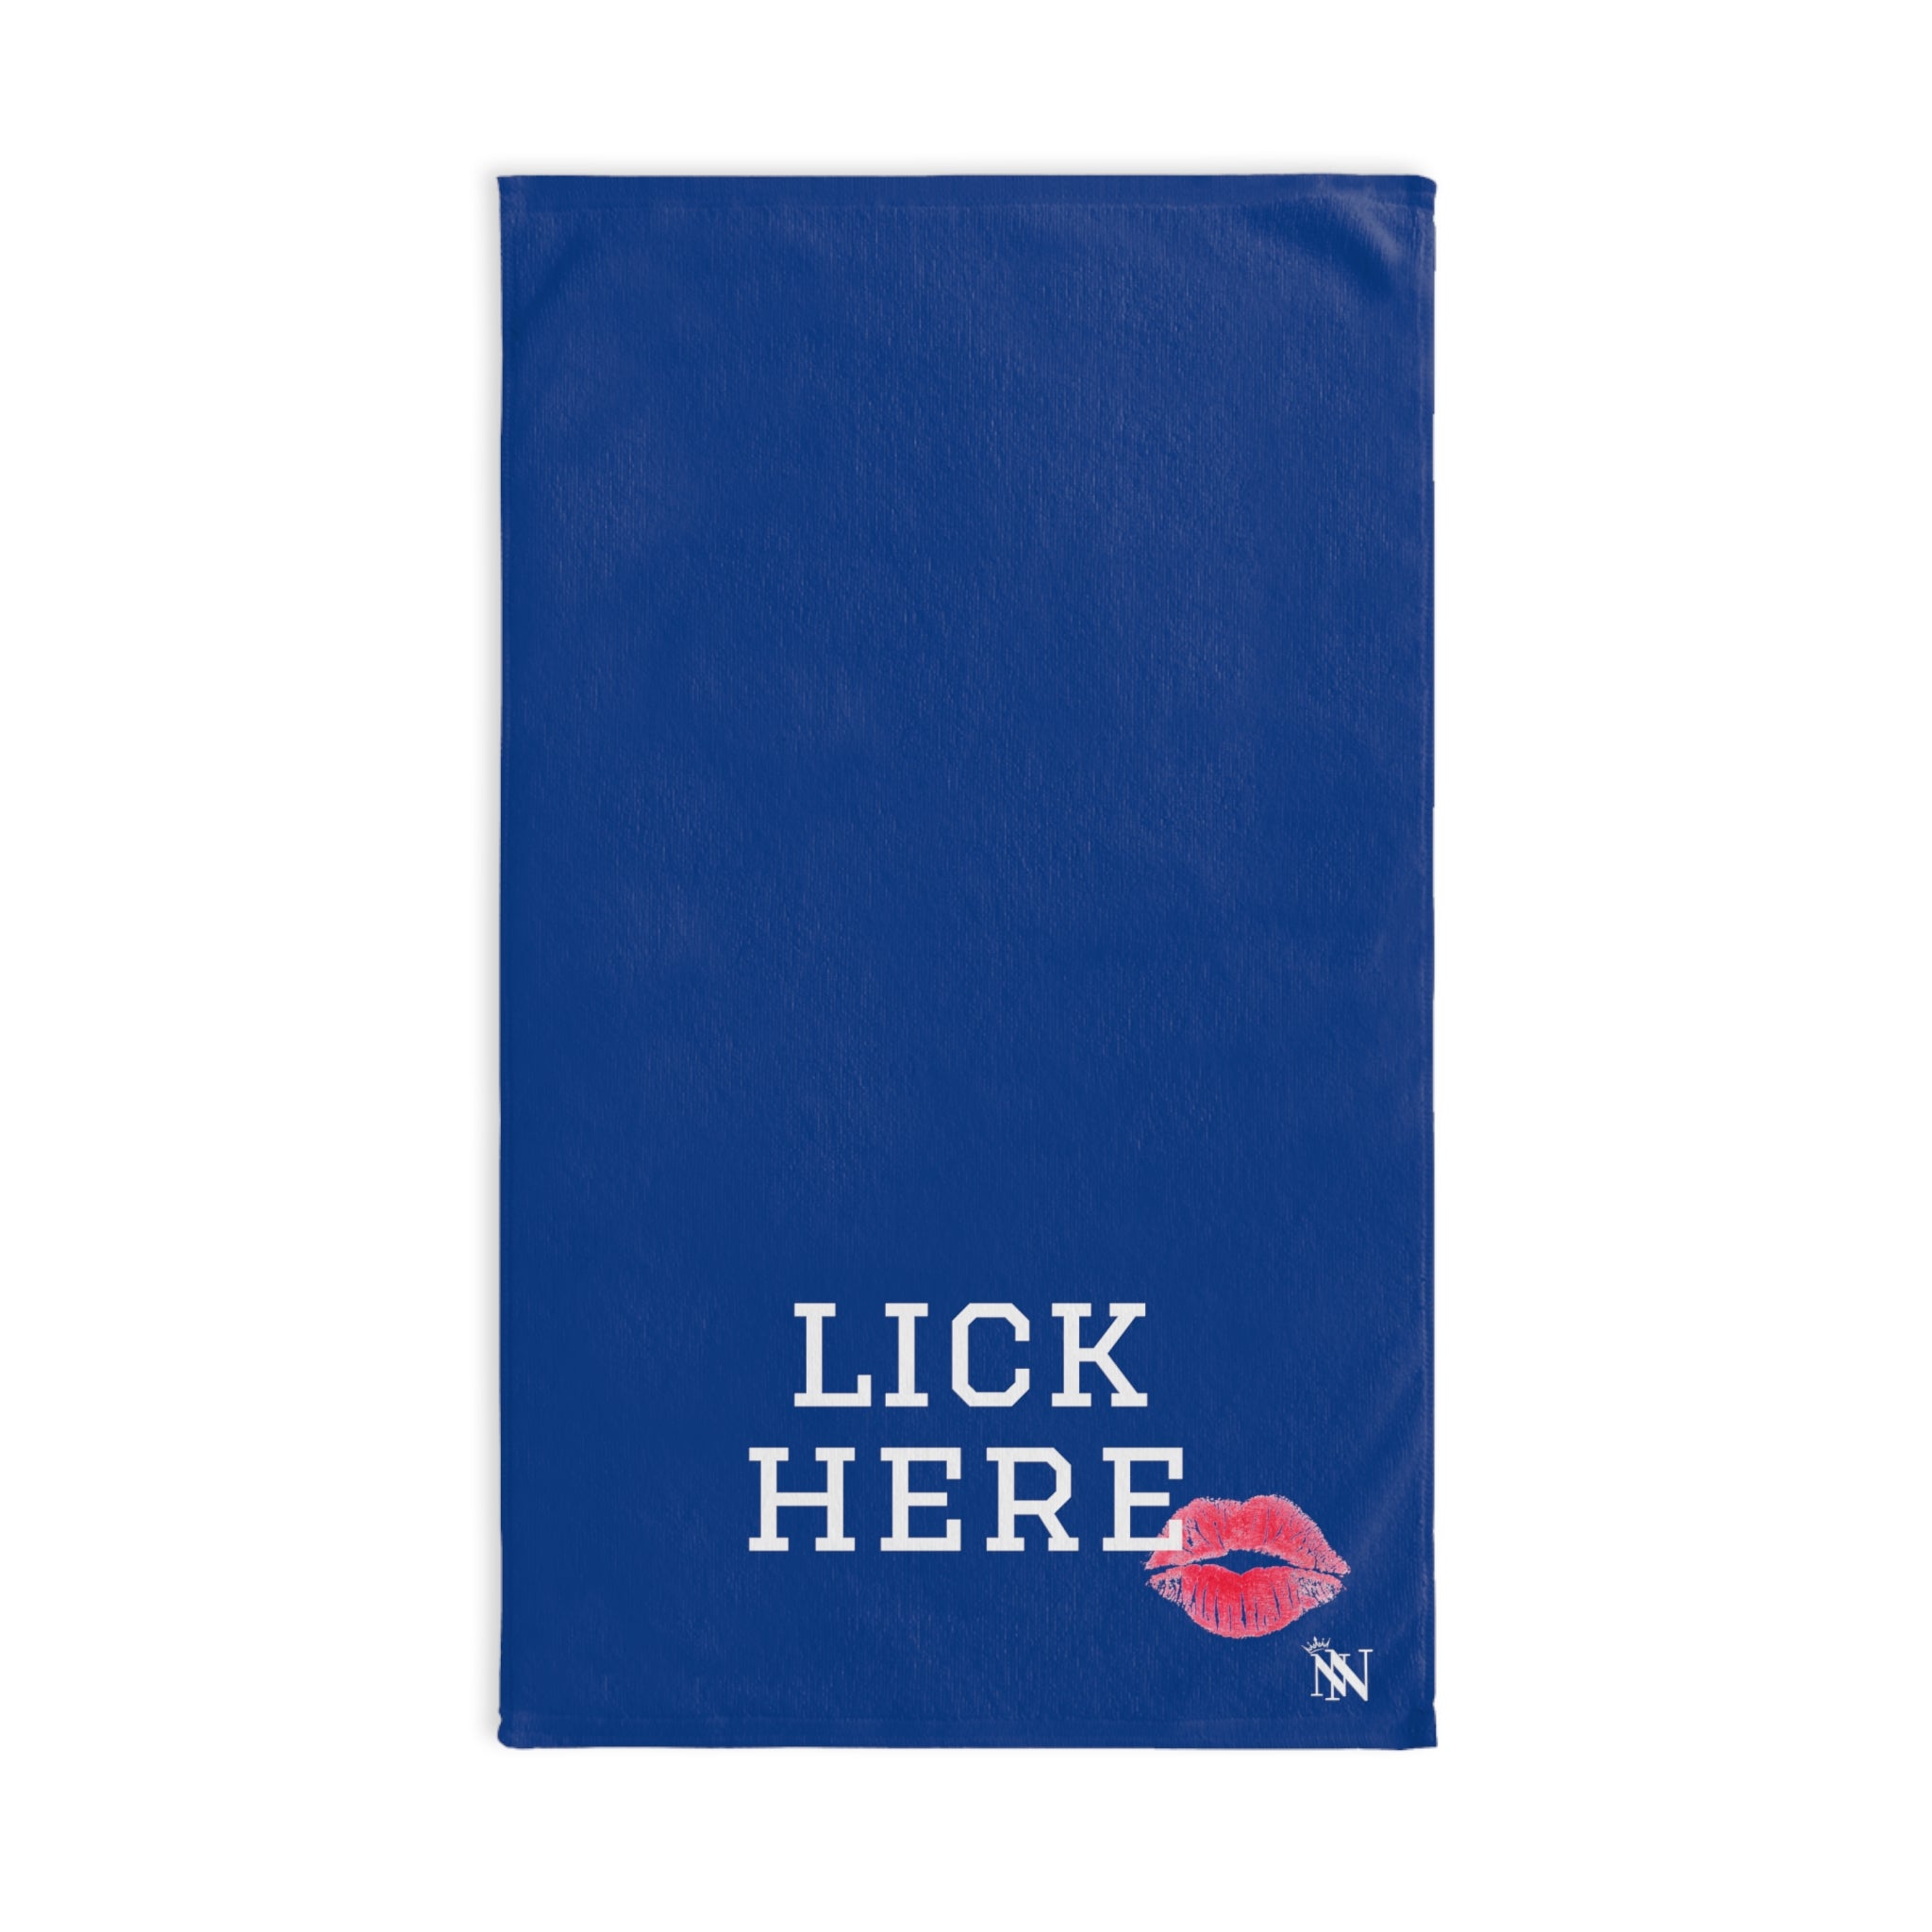 Lick Here KissingBlue | Gifts for Boyfriend, Funny Towel Romantic Gift for Wedding Couple Fiance First Year Anniversary Valentines, Party Gag Gifts, Joke Humor Cloth for Husband Men BF NECTAR NAPKINS